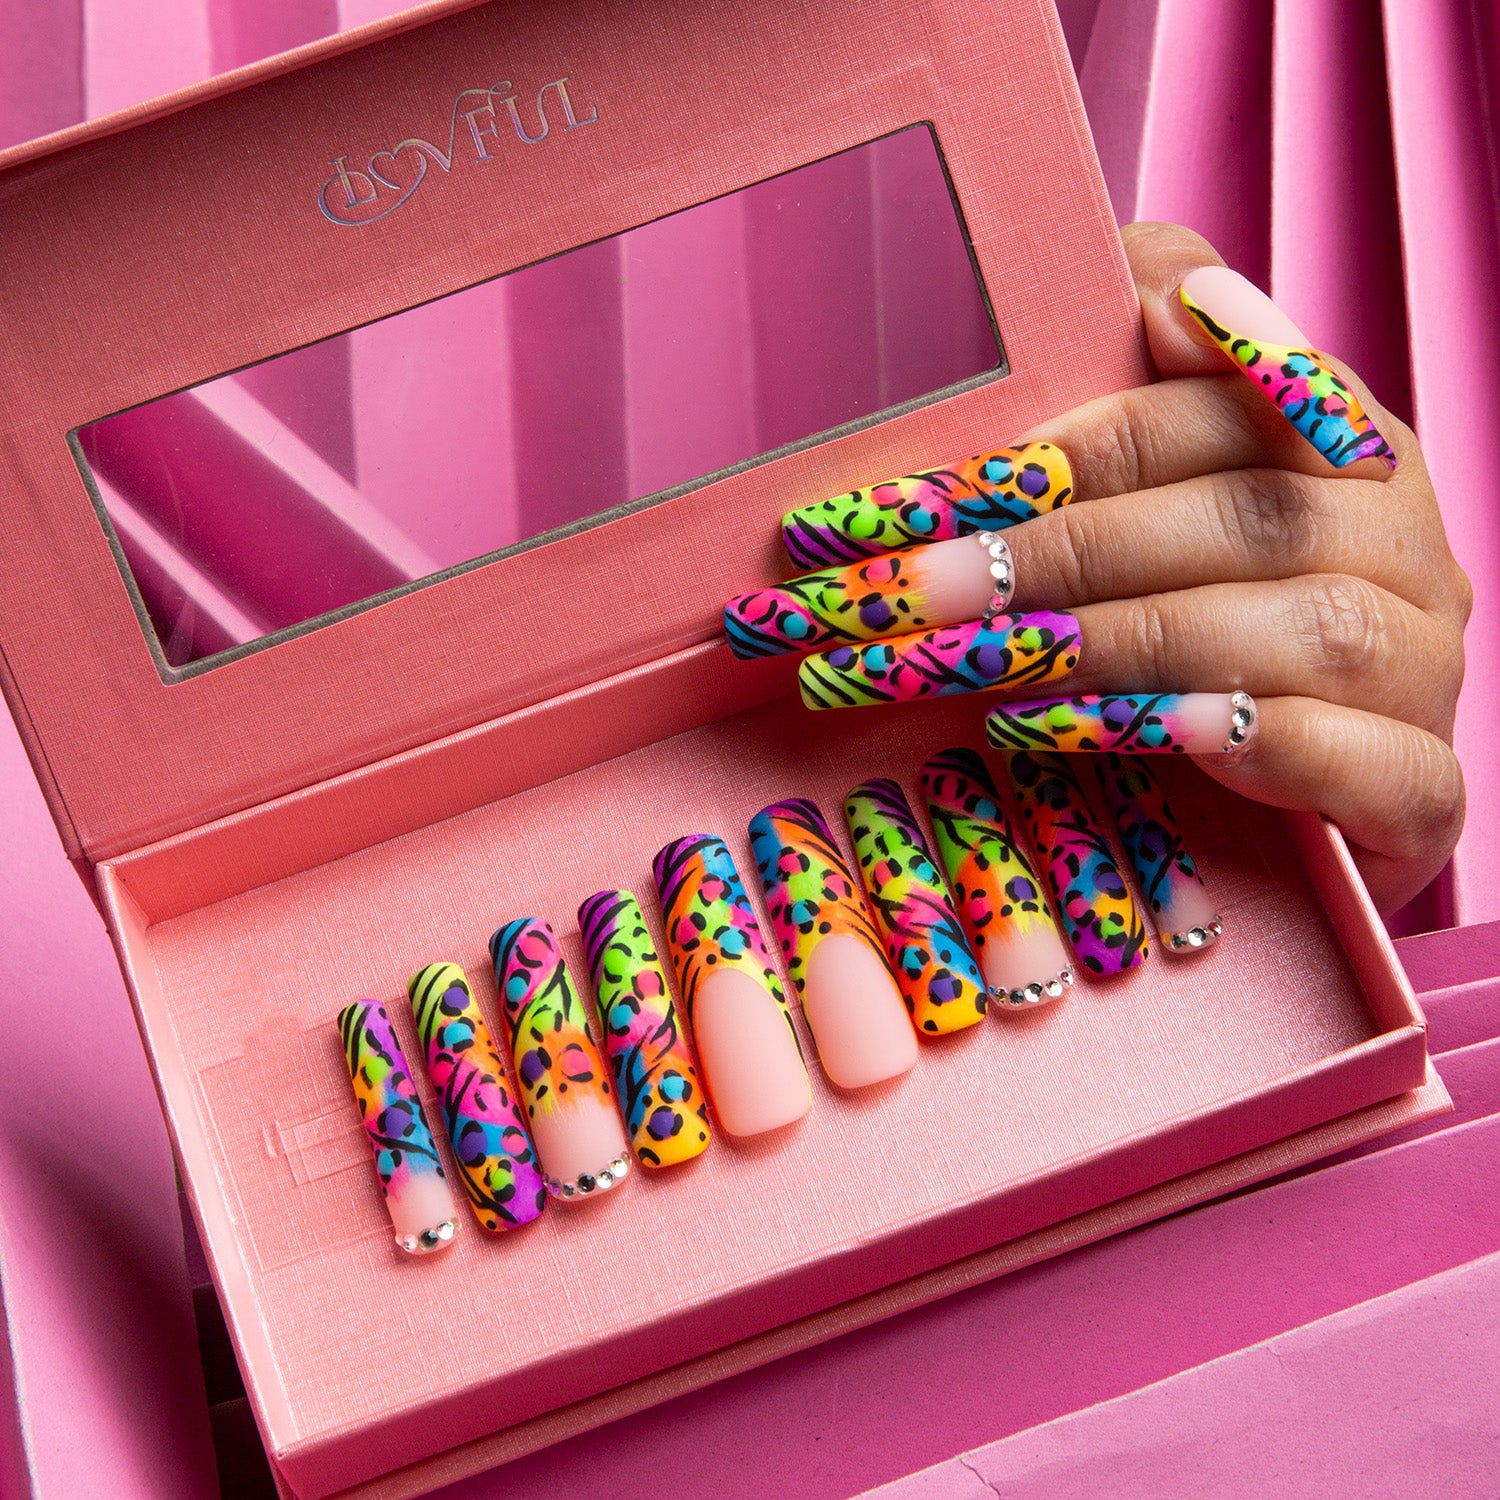 Colorful press-on nails with leopard print French tips displayed in a pink box, hand showing applied nails, vibrant pink background.